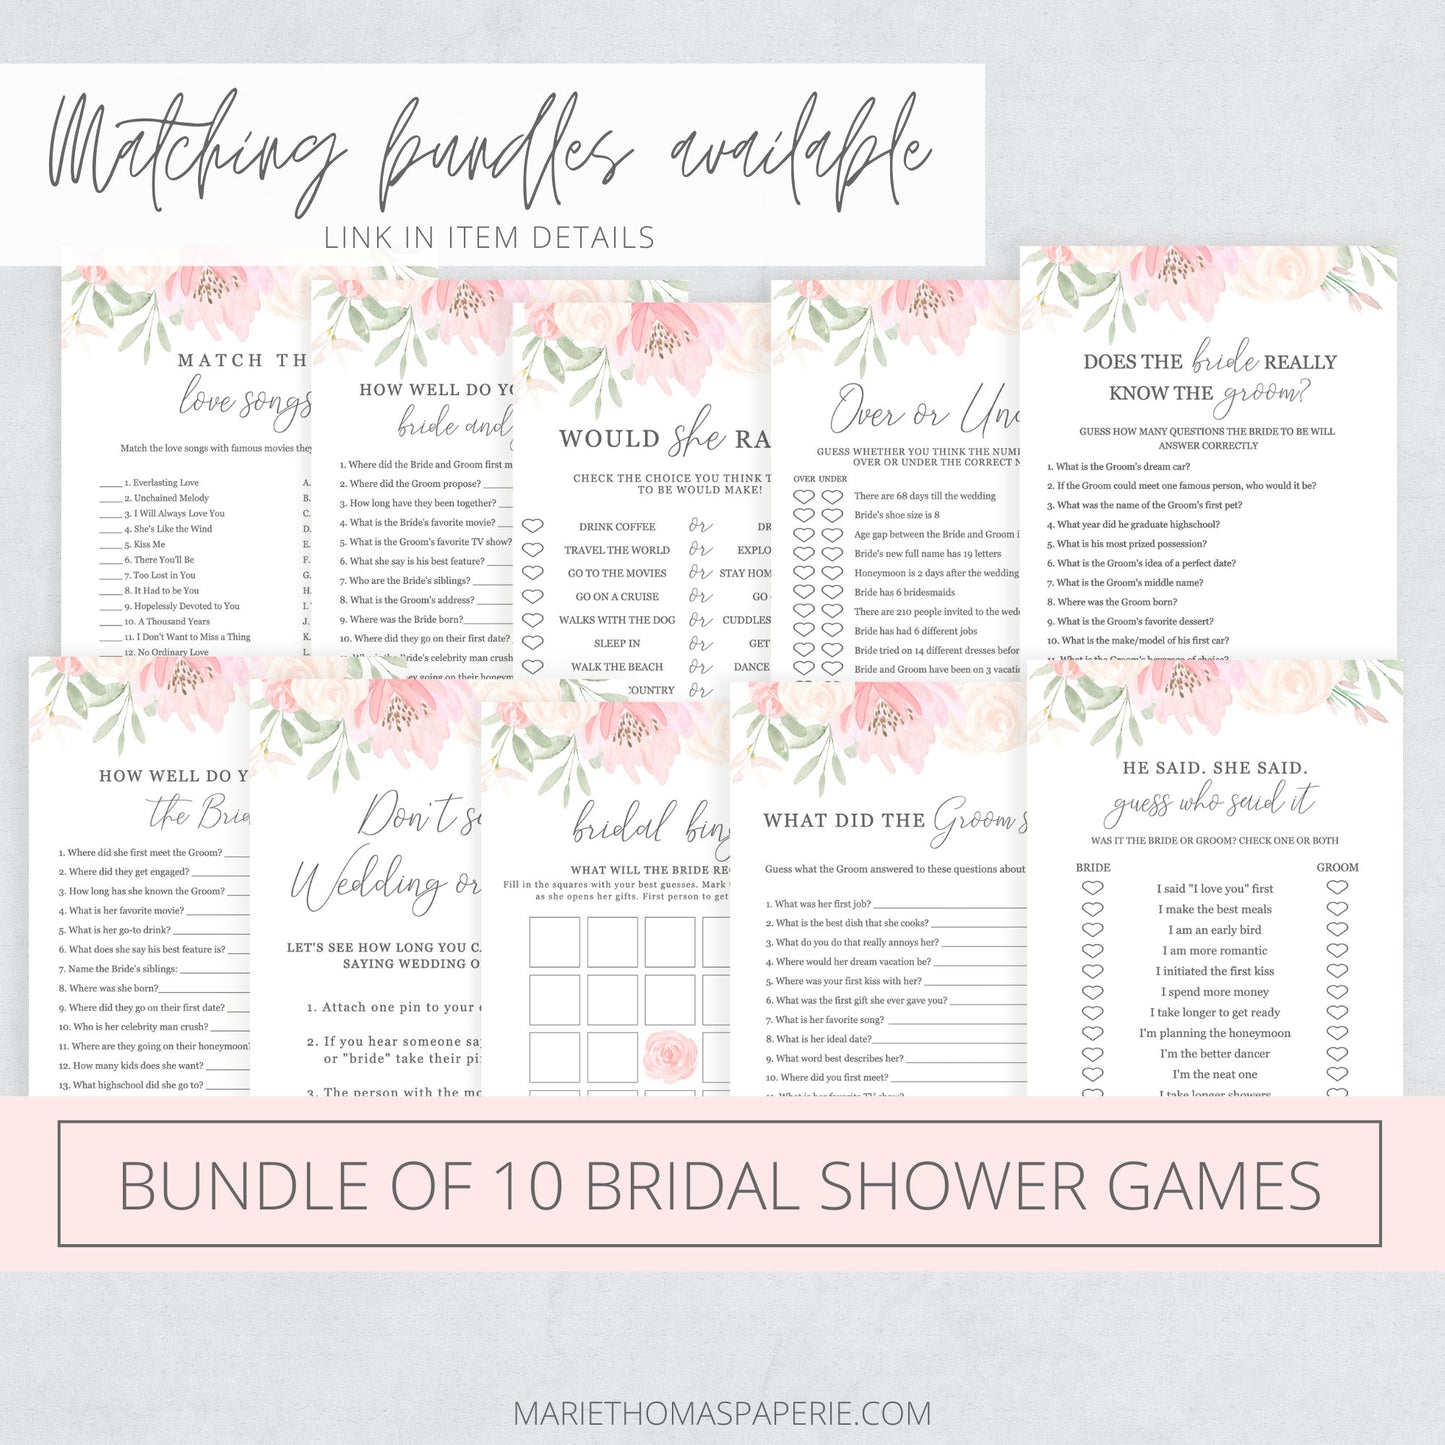 Editable How Well Do You Know the Bride and Groom Bridal Shower Games Wedding Games Template